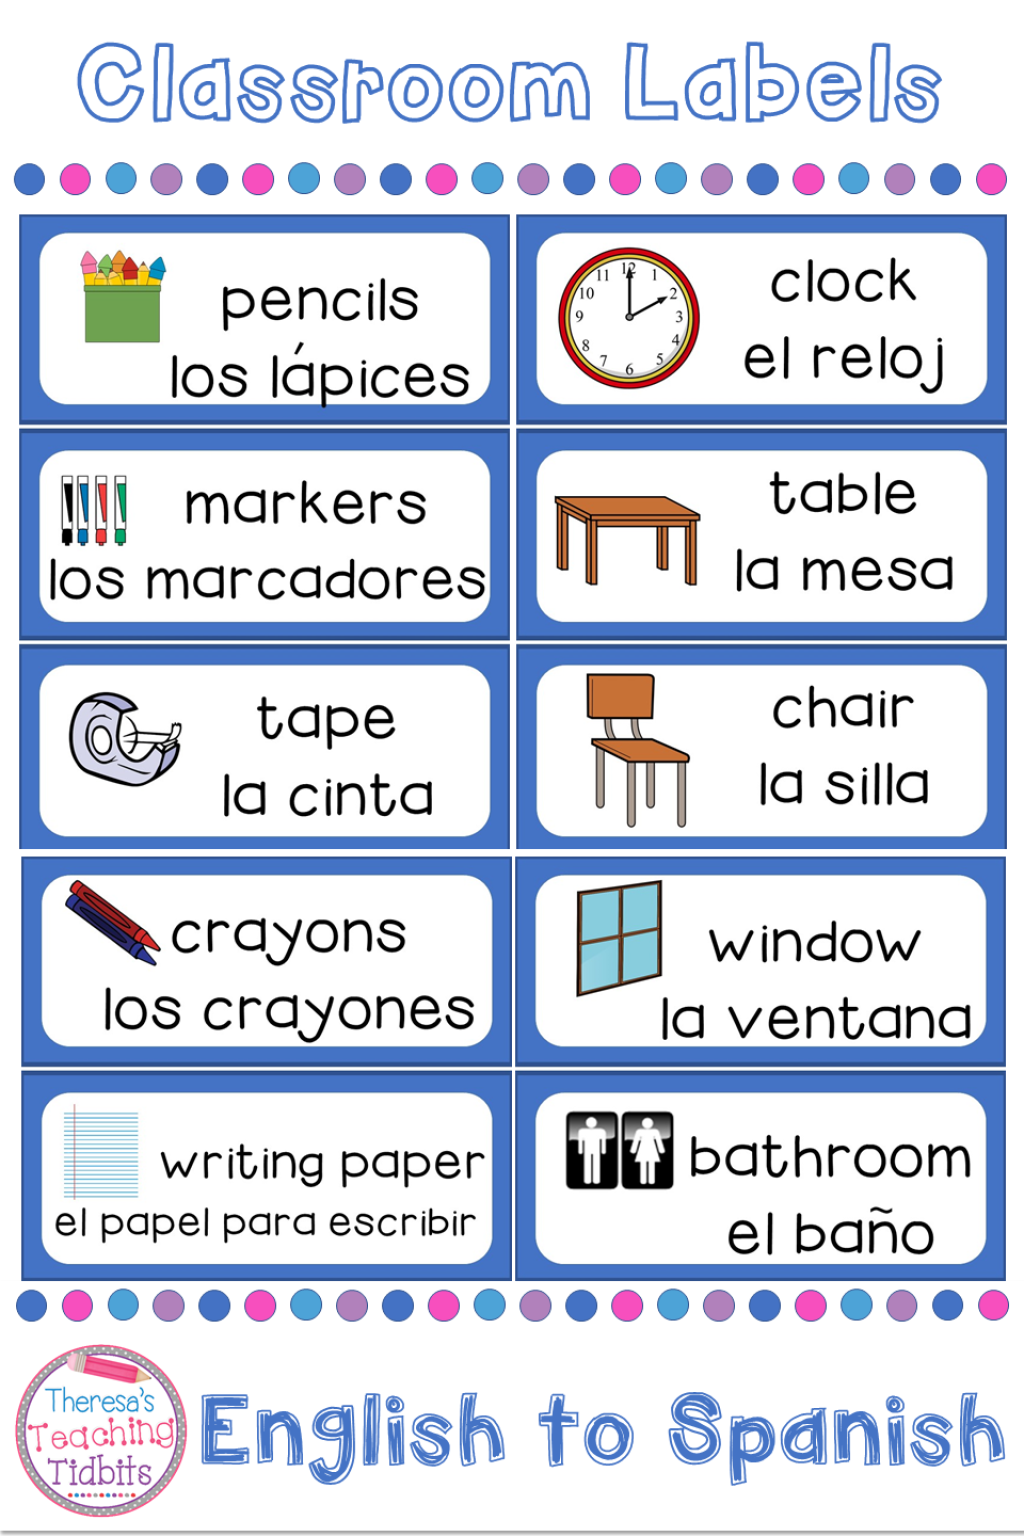 Picture of: Classroom Labels English to Spanish  Classroom labels, Spanish